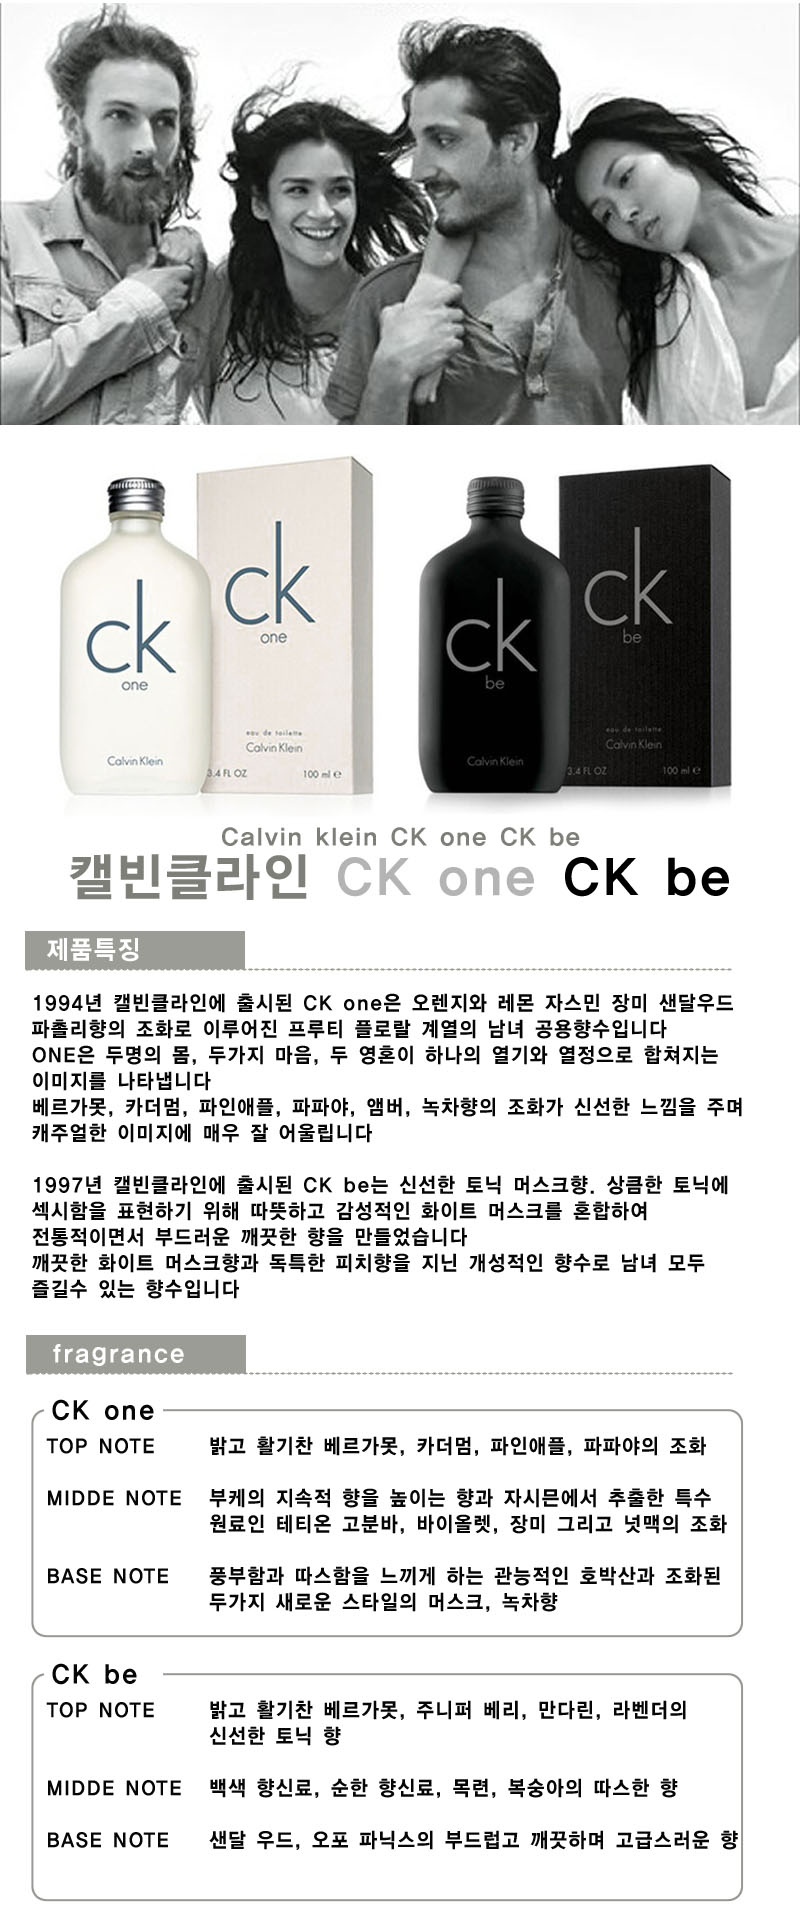 is ck one male or female